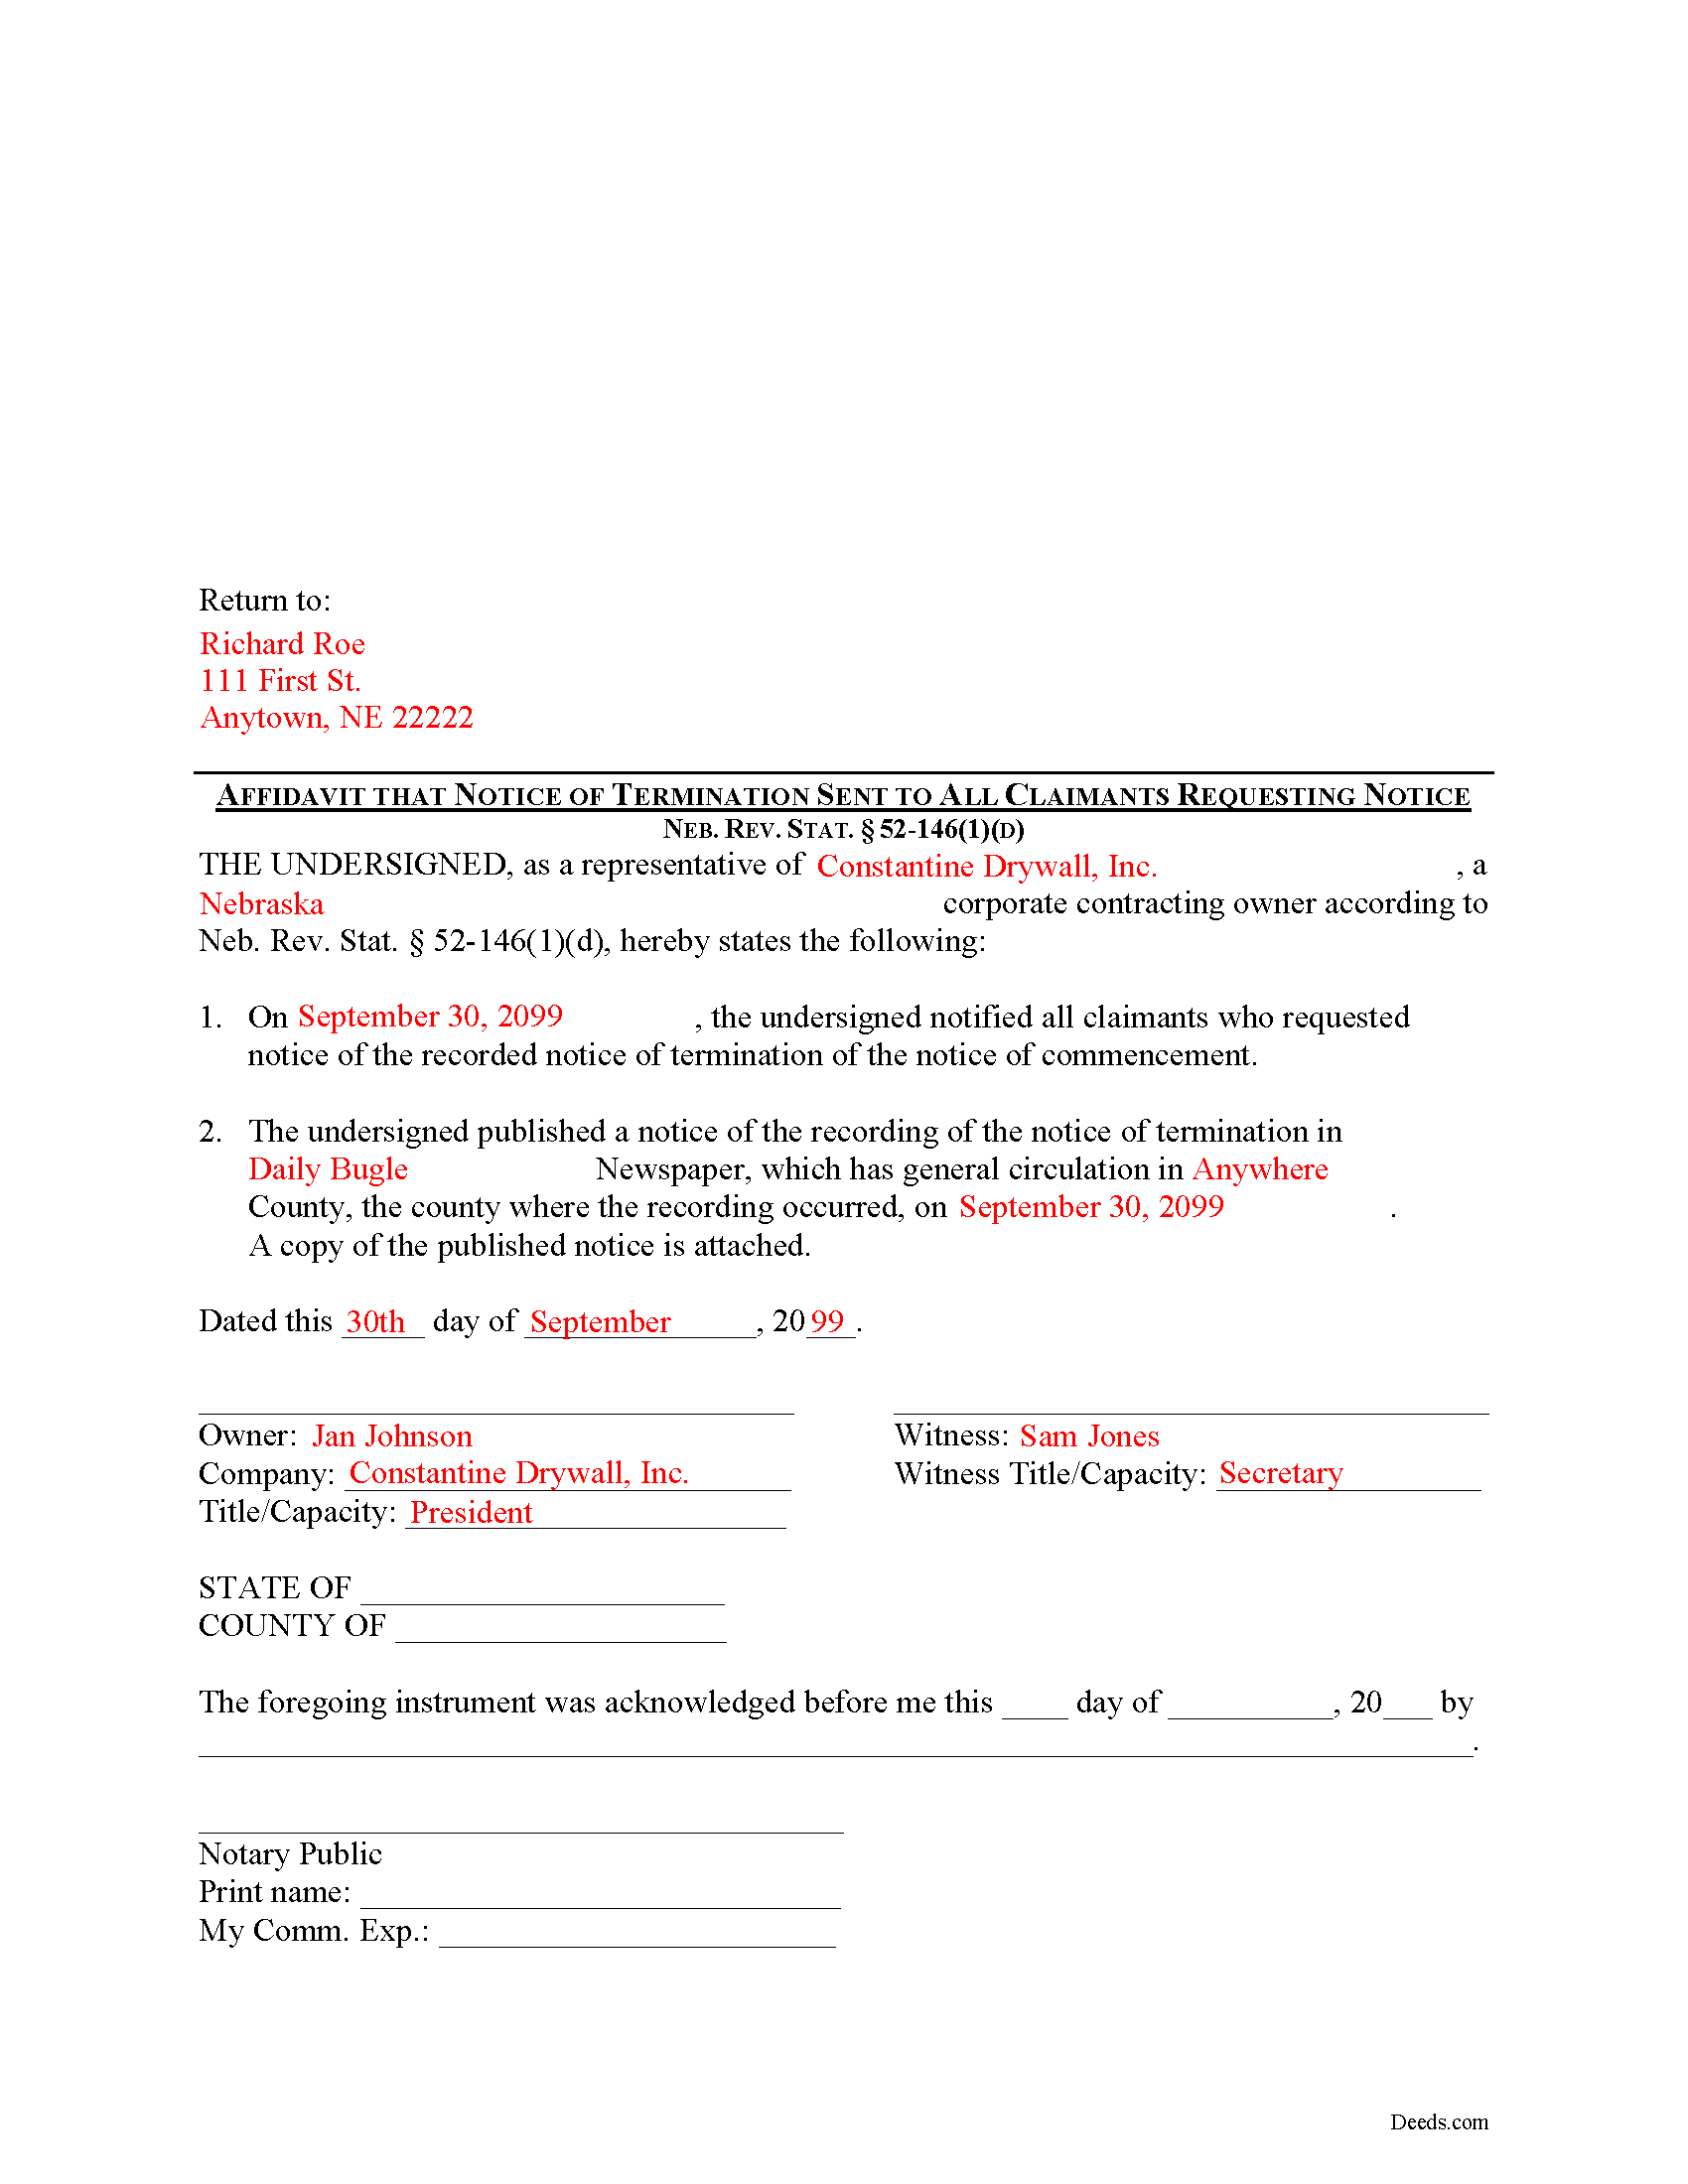 Completed Example of the Notice of Termination Affidavit Document